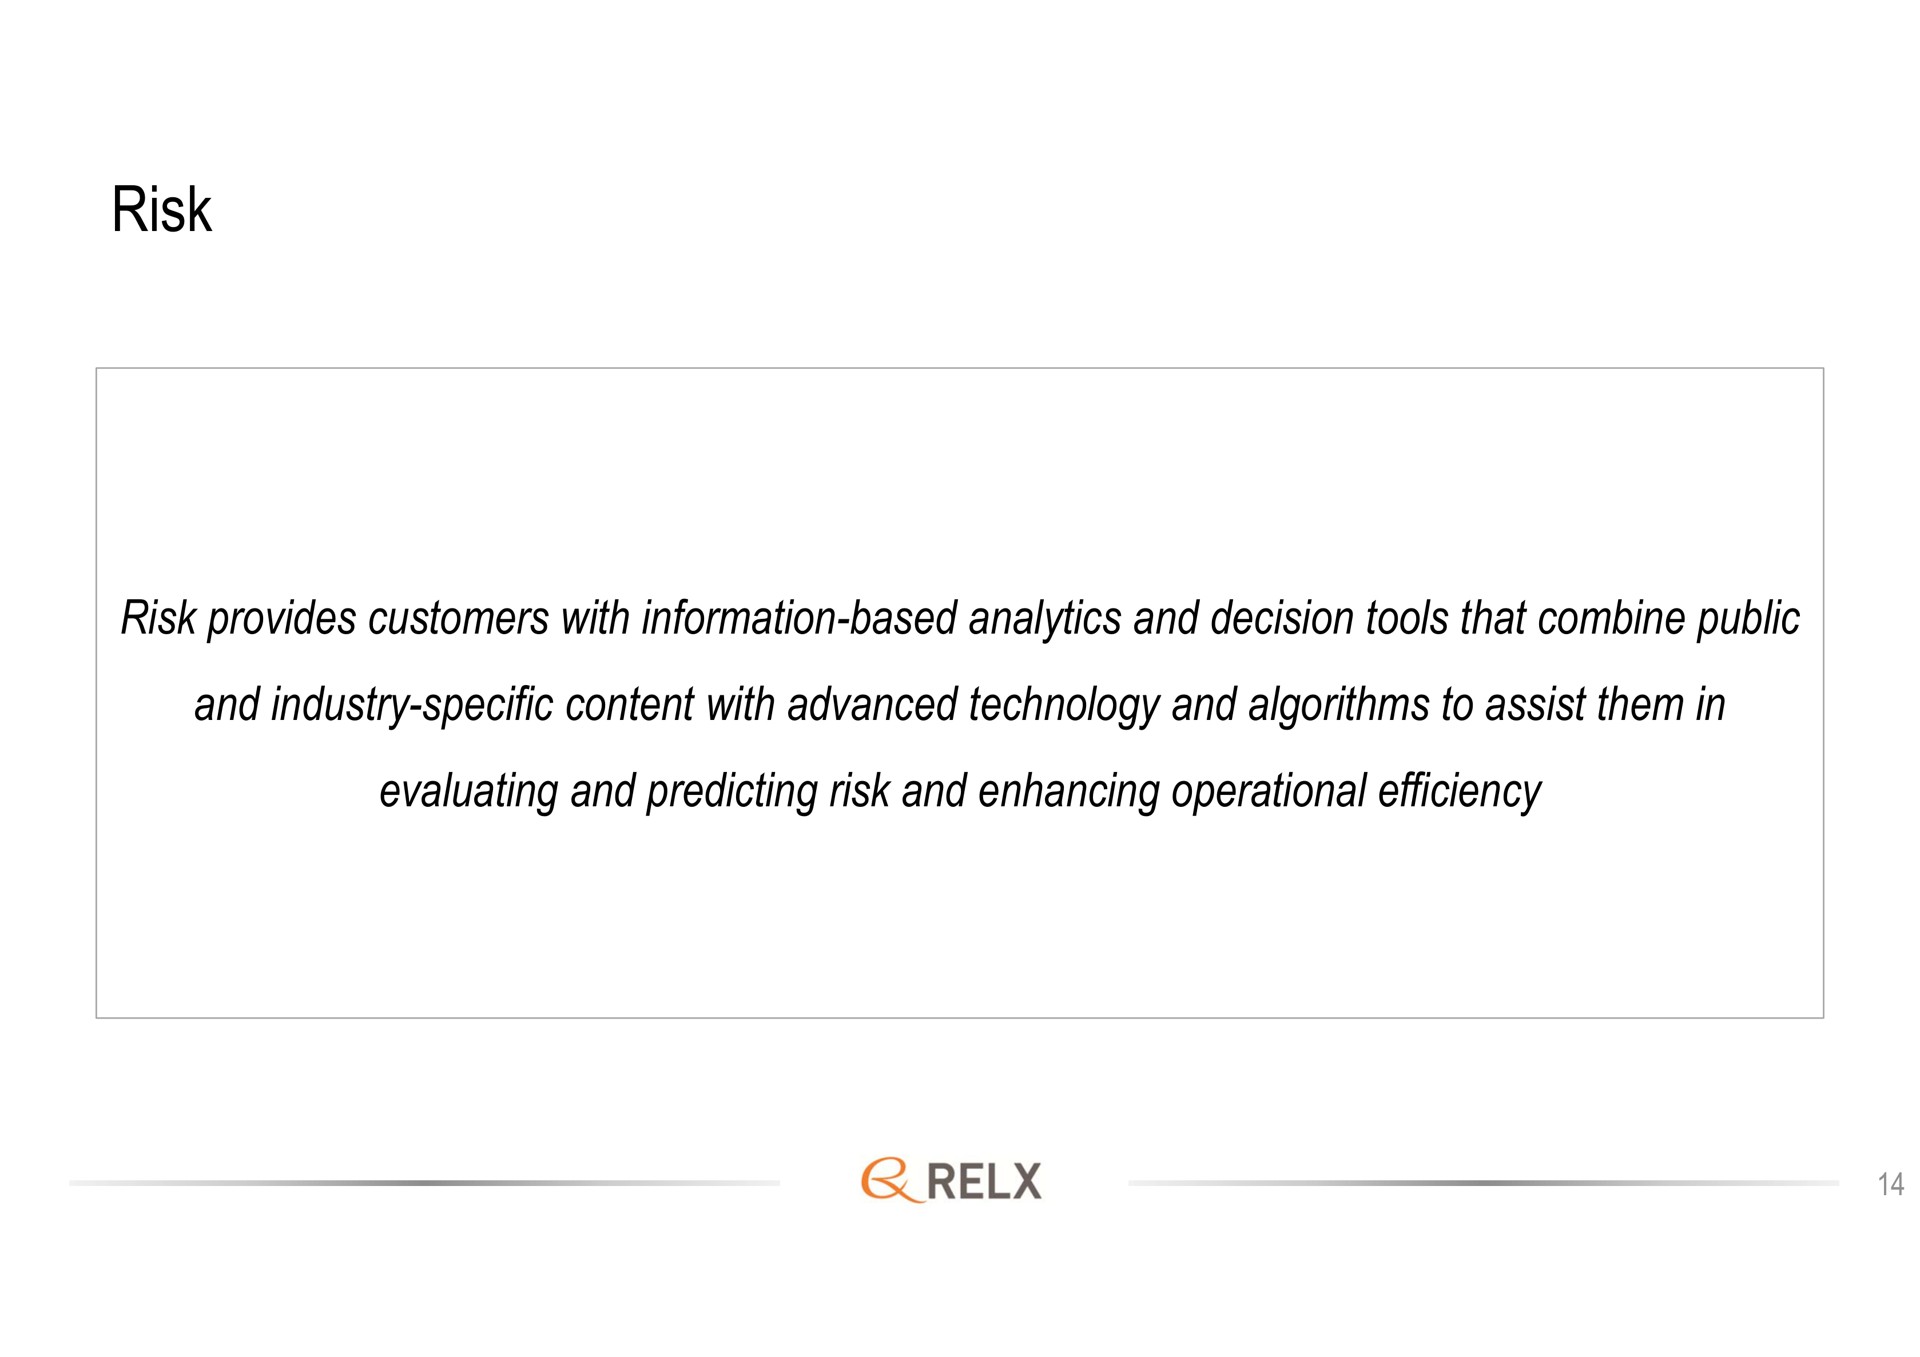 risk risk provides customers with information based analytics and decision tools that combine public and industry specific content with advanced technology and algorithms to assist them in evaluating and predicting risk and enhancing operational efficiency | RELX